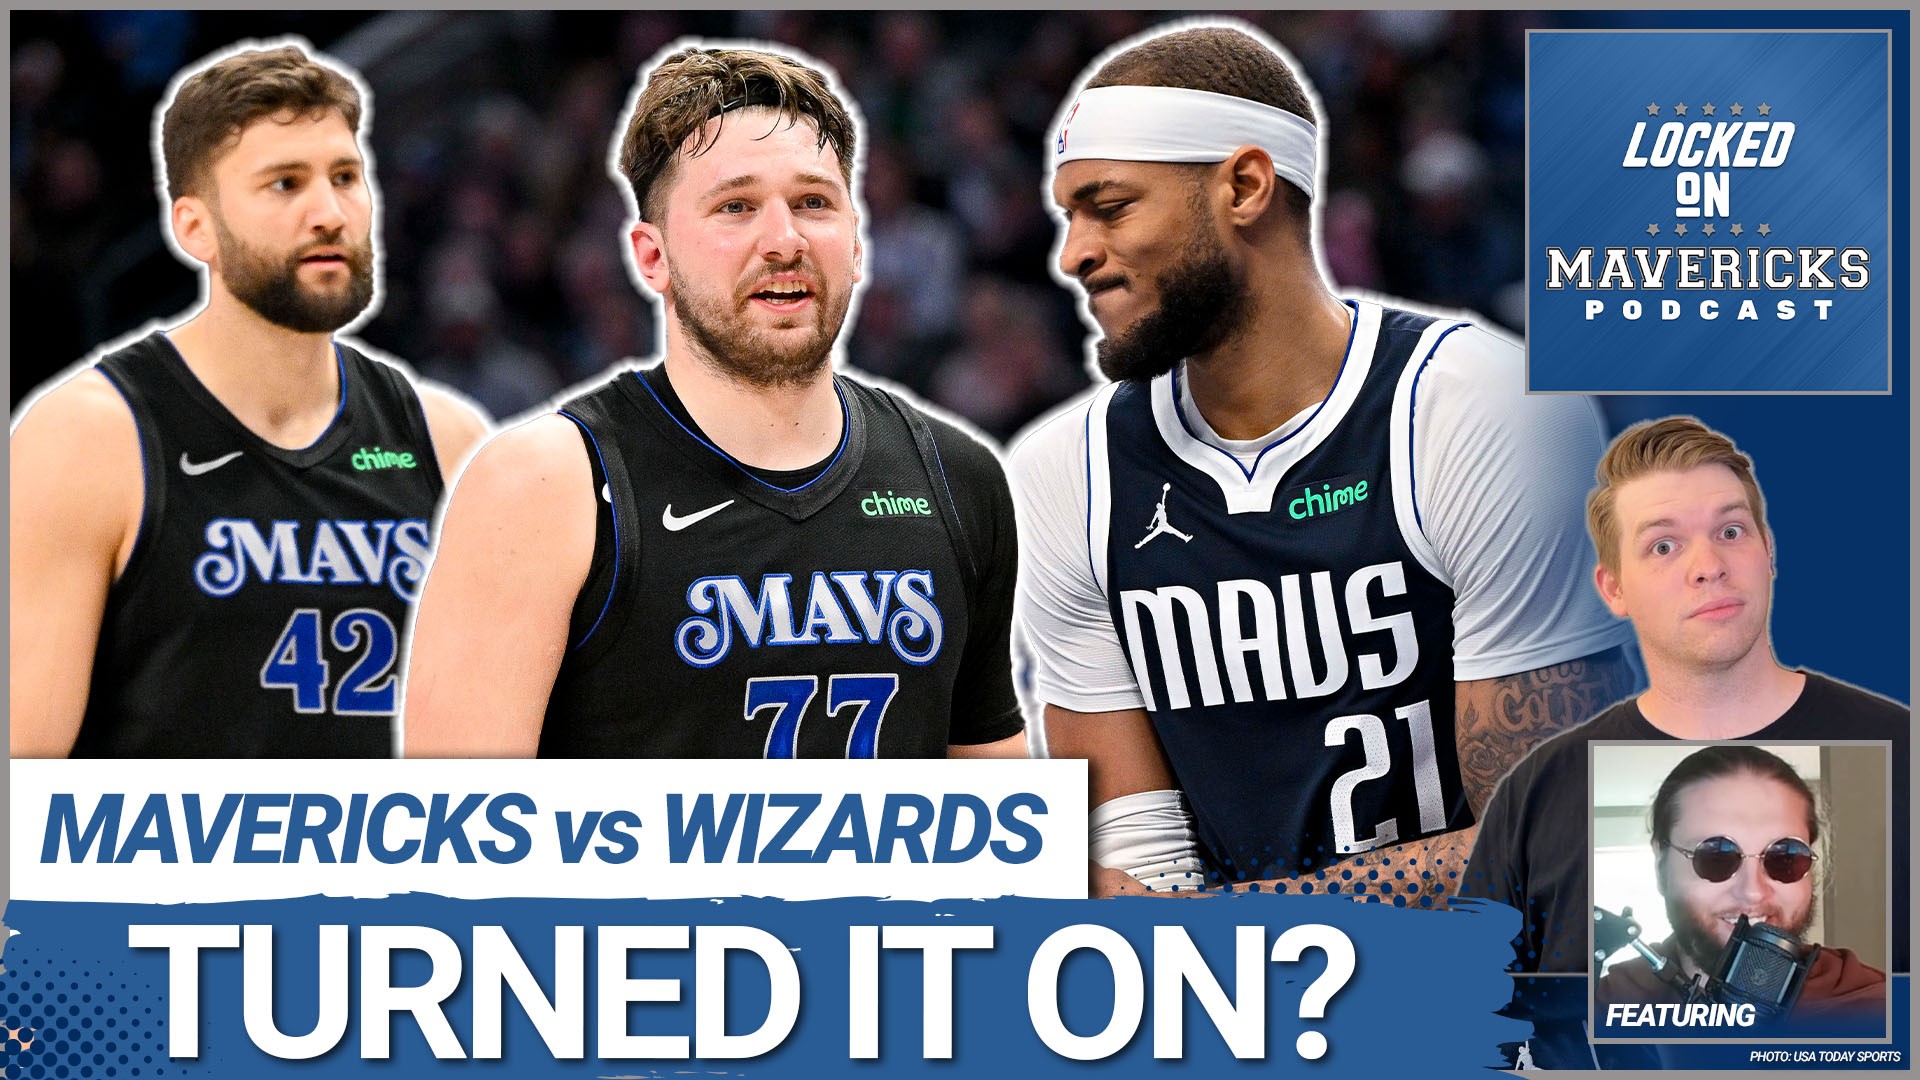 Nick Angstadt & Slightly Biased breakdown the Dallas Mavericks win over the Wizards, Daniel Gafford's big game, Kyrie Irving's efforts, and Luka Doncic cloing.